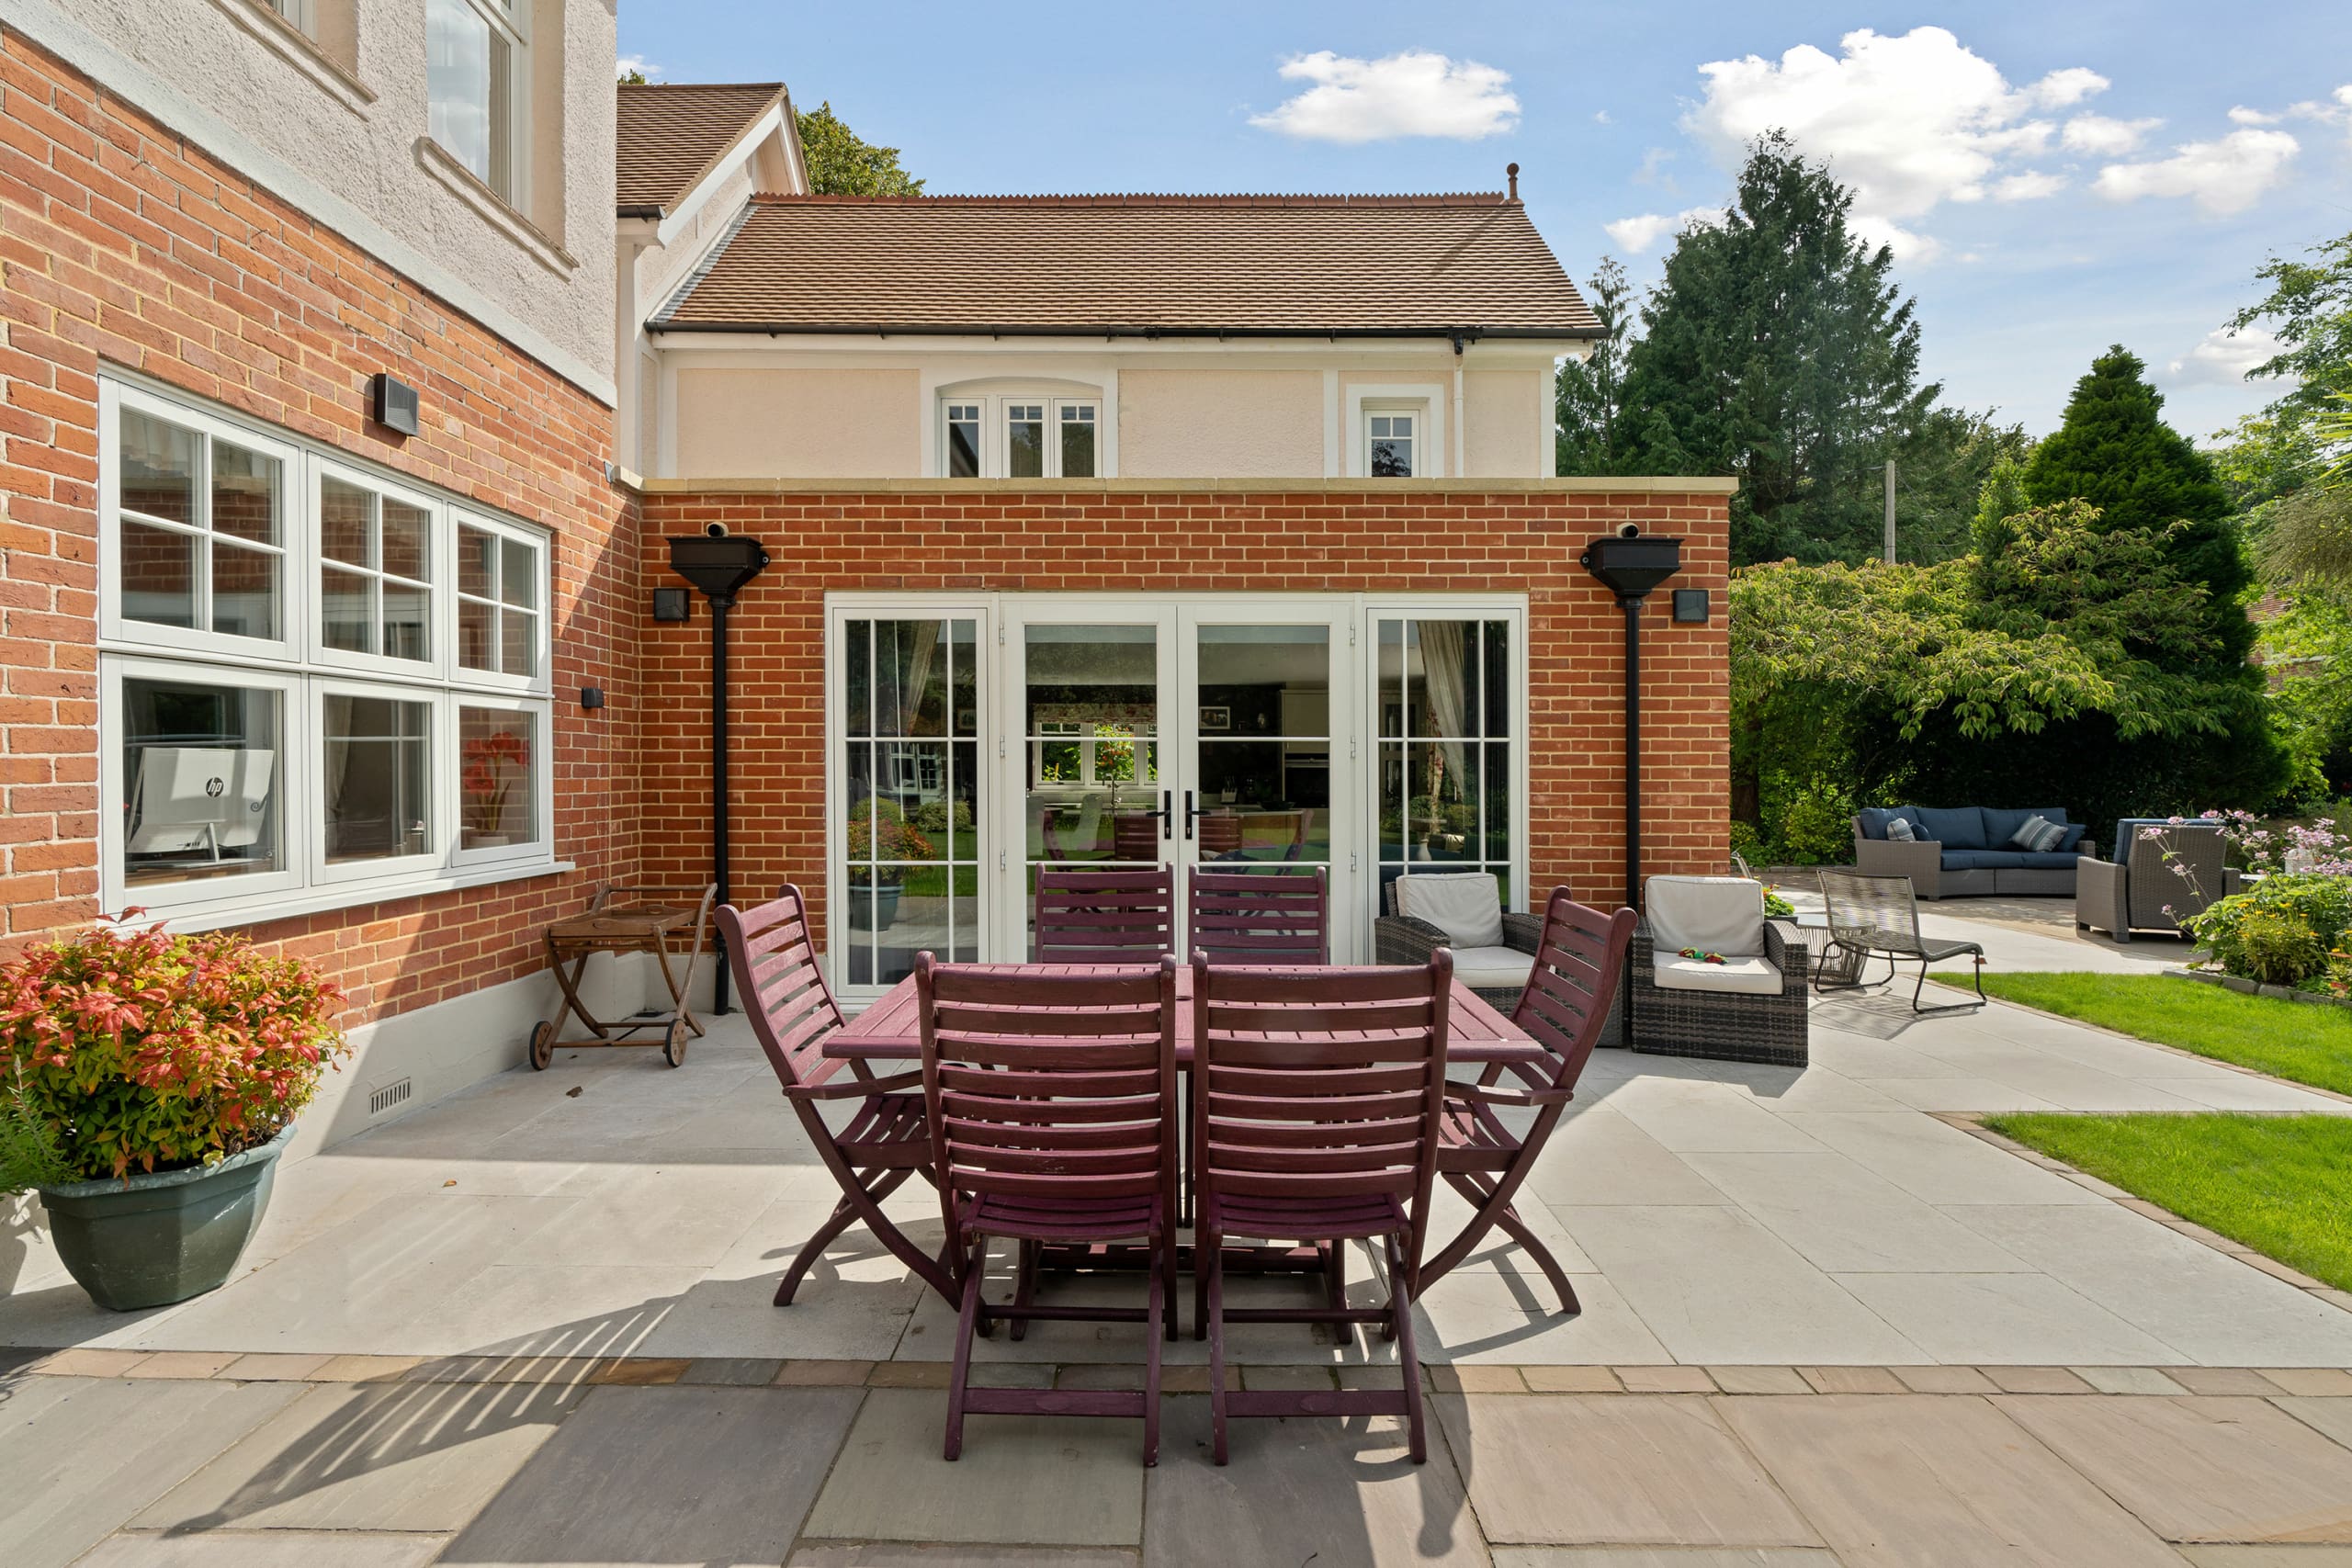 Substantial home with view of the modern brick extension with white french entrance doors and wooden garden furniture.